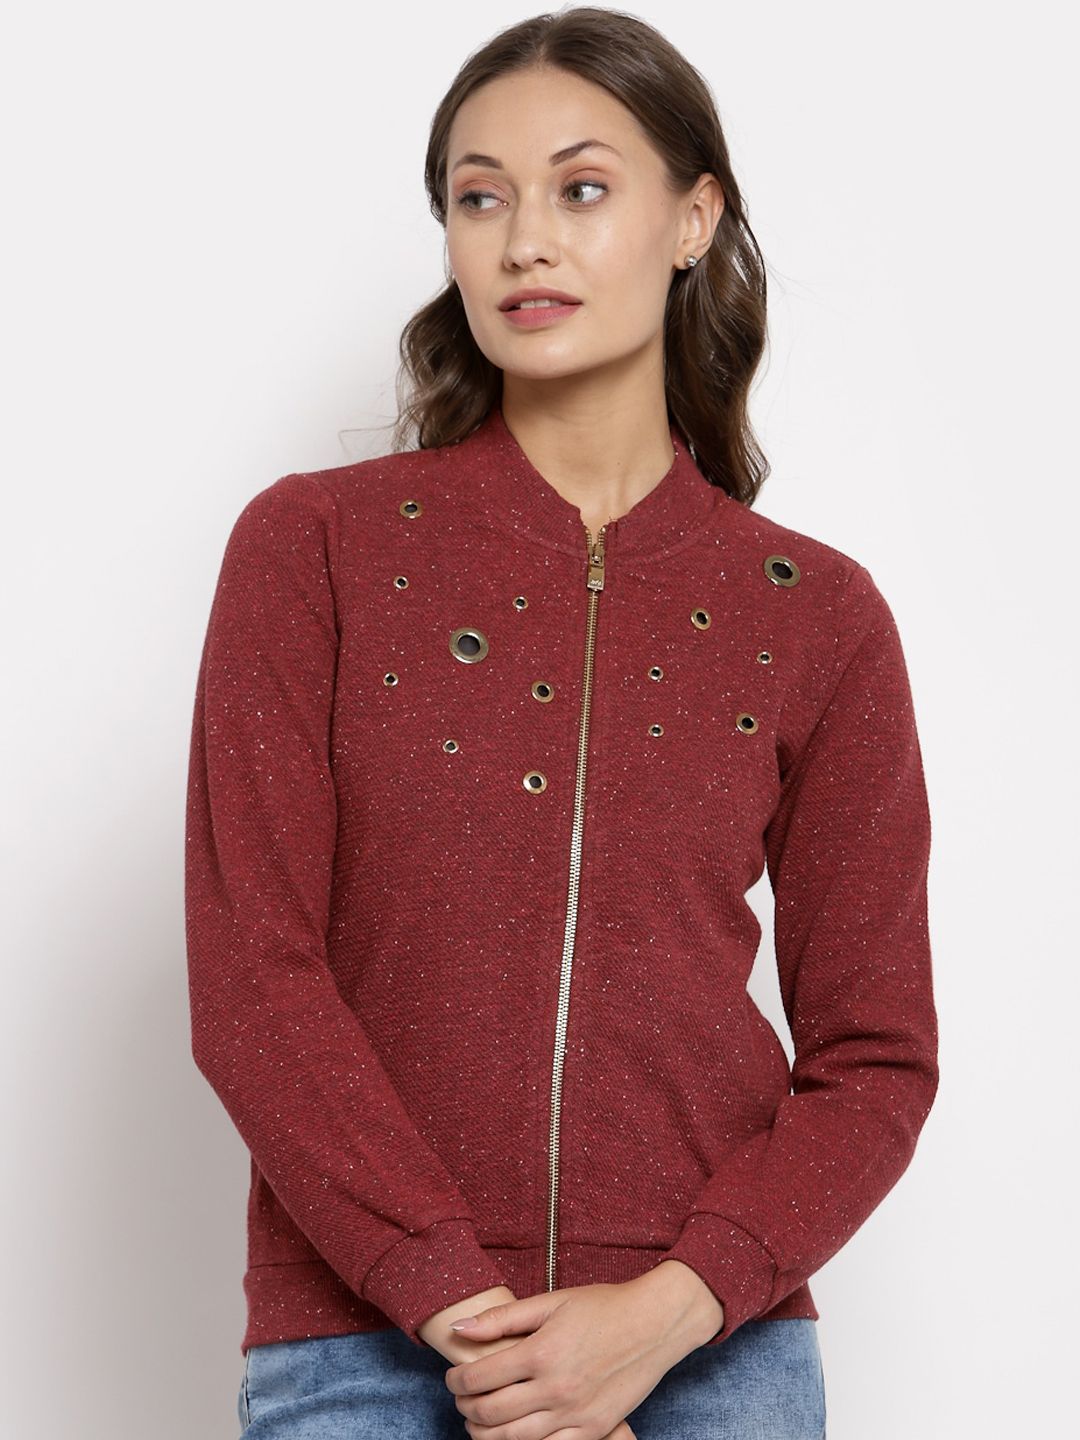 Juelle Women Red & Gold-Toned Embellished Sweatshirt Price in India